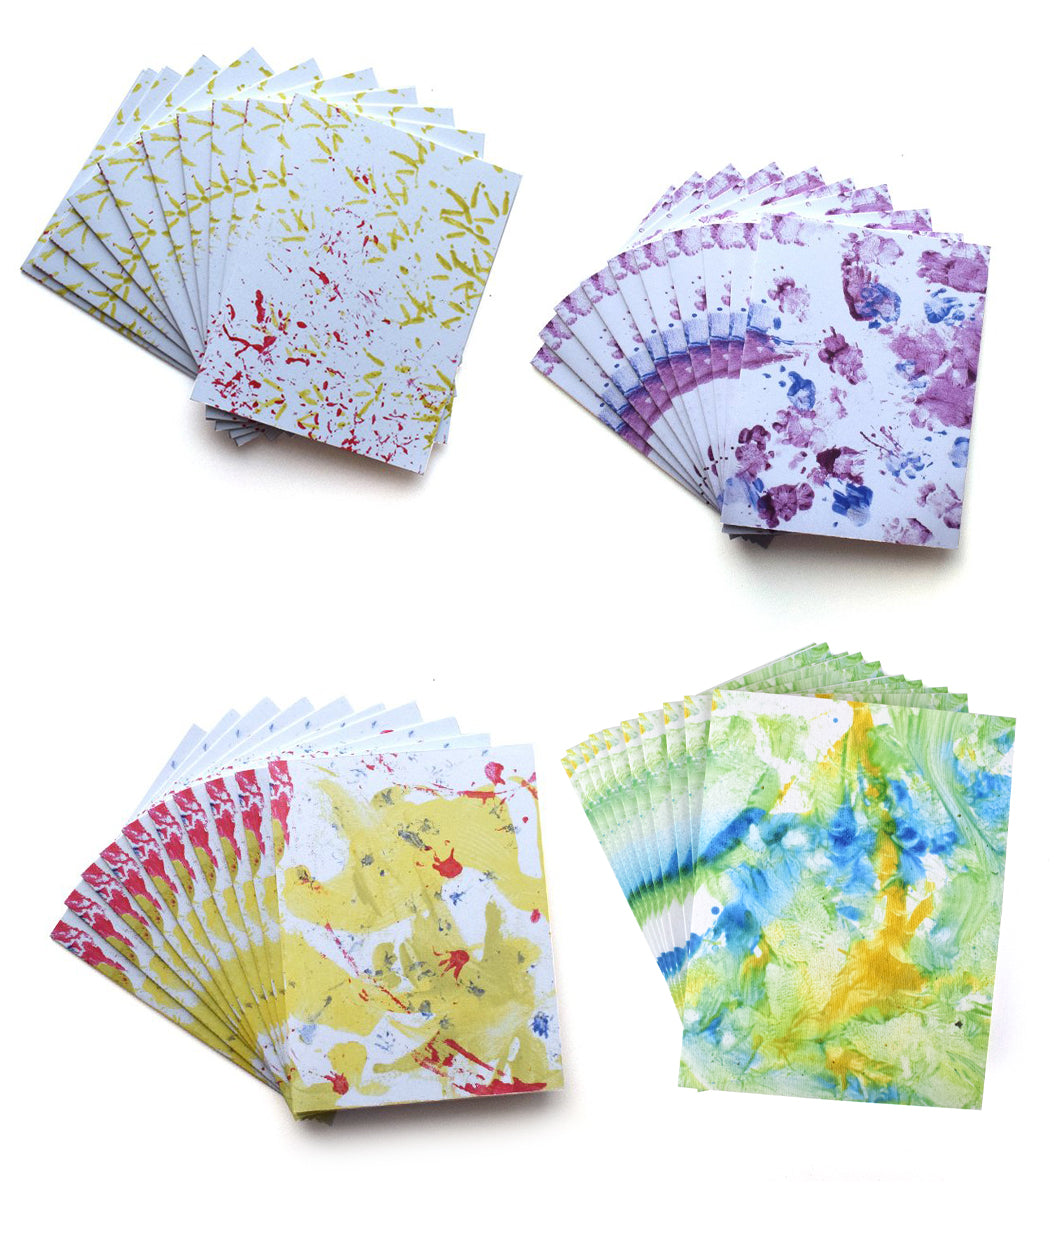 Four different styles of greeting cards. Each style has multiple cards fanned out behind. Top left: Yellow bird footprints and red sprinkle of seeds. Top right: Purple and blue footprints made by skunk and cavy. Bottom left: Primarily yellow paint with red streaks and smattering of blue made by beaver. Bottom right: Primarily green paint with yellow and blue swooshes made by two lizards and two snakes - from Animal Wonders